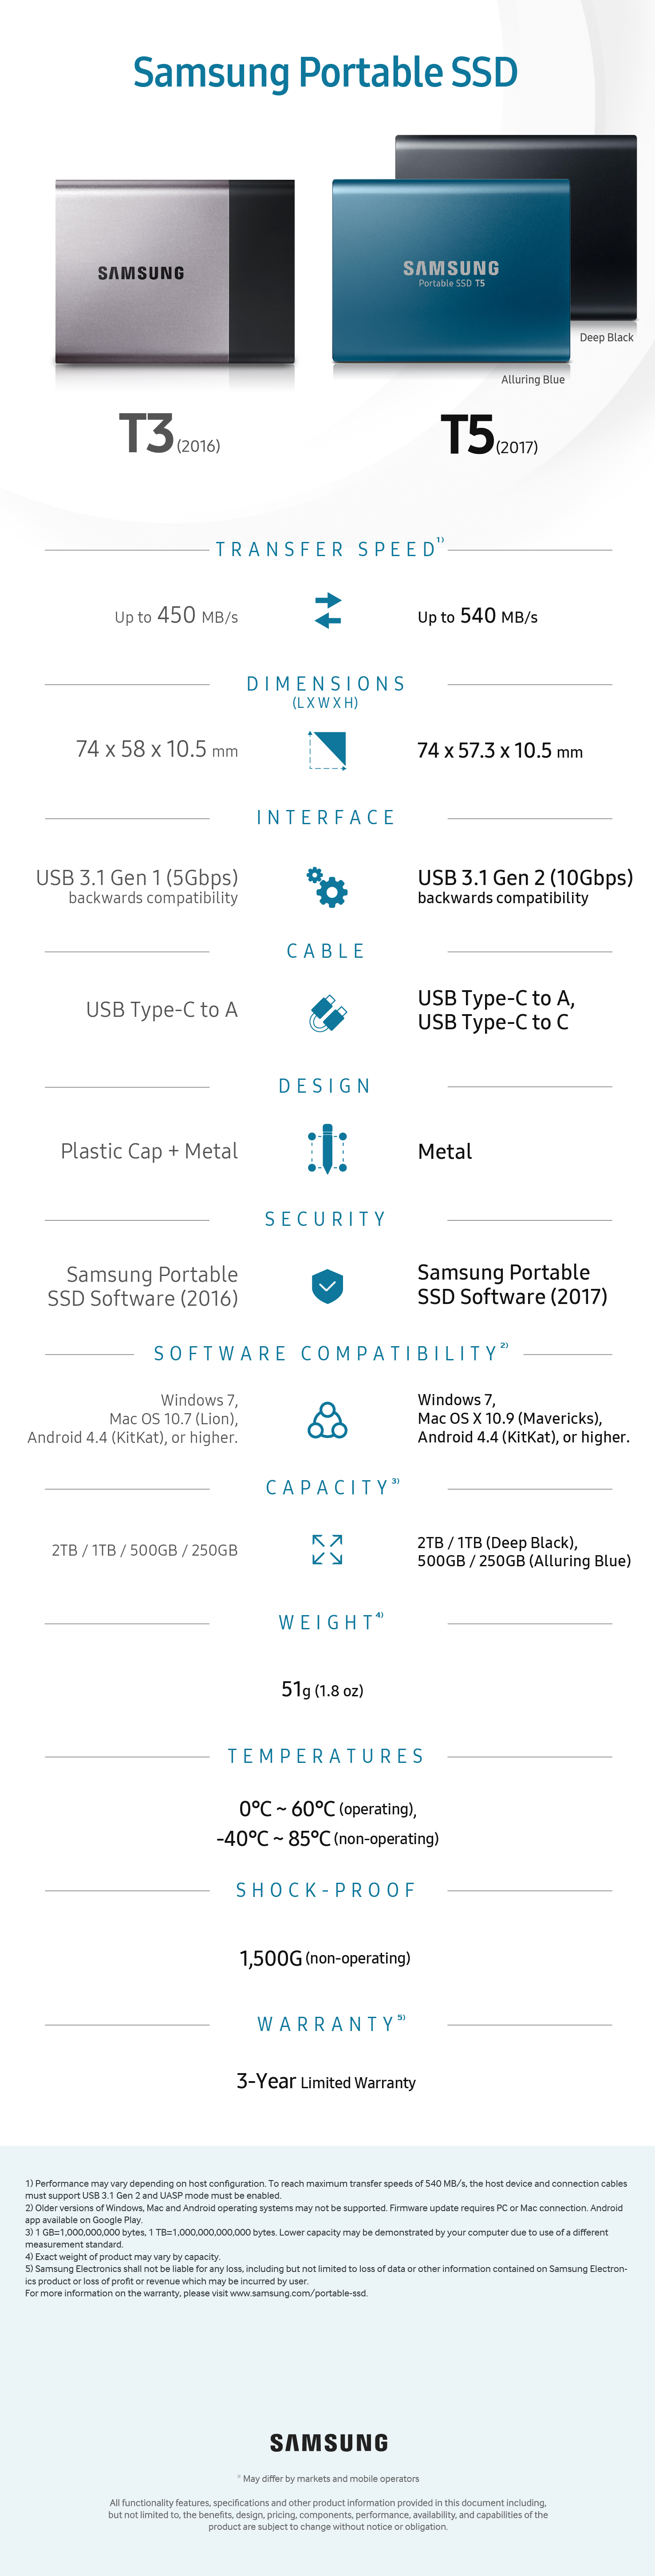 How Samsung's New T5 Compares to the Old T3 Portable SSD (Infographic)